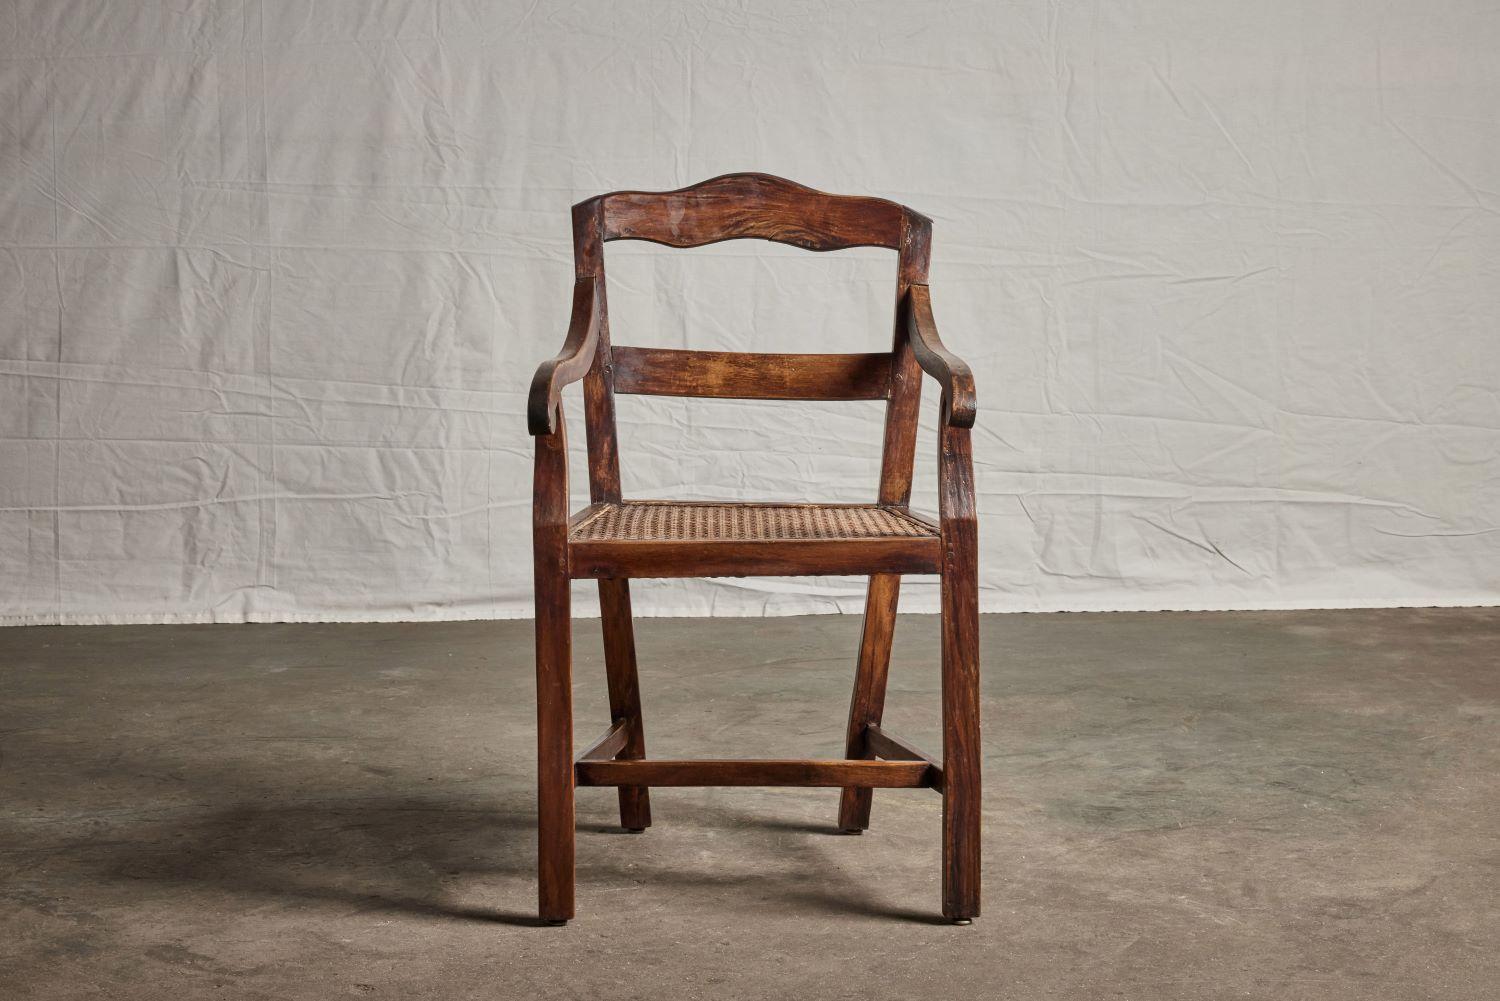 Philippine Nara Wood Arm Chair with Cane Seat 1